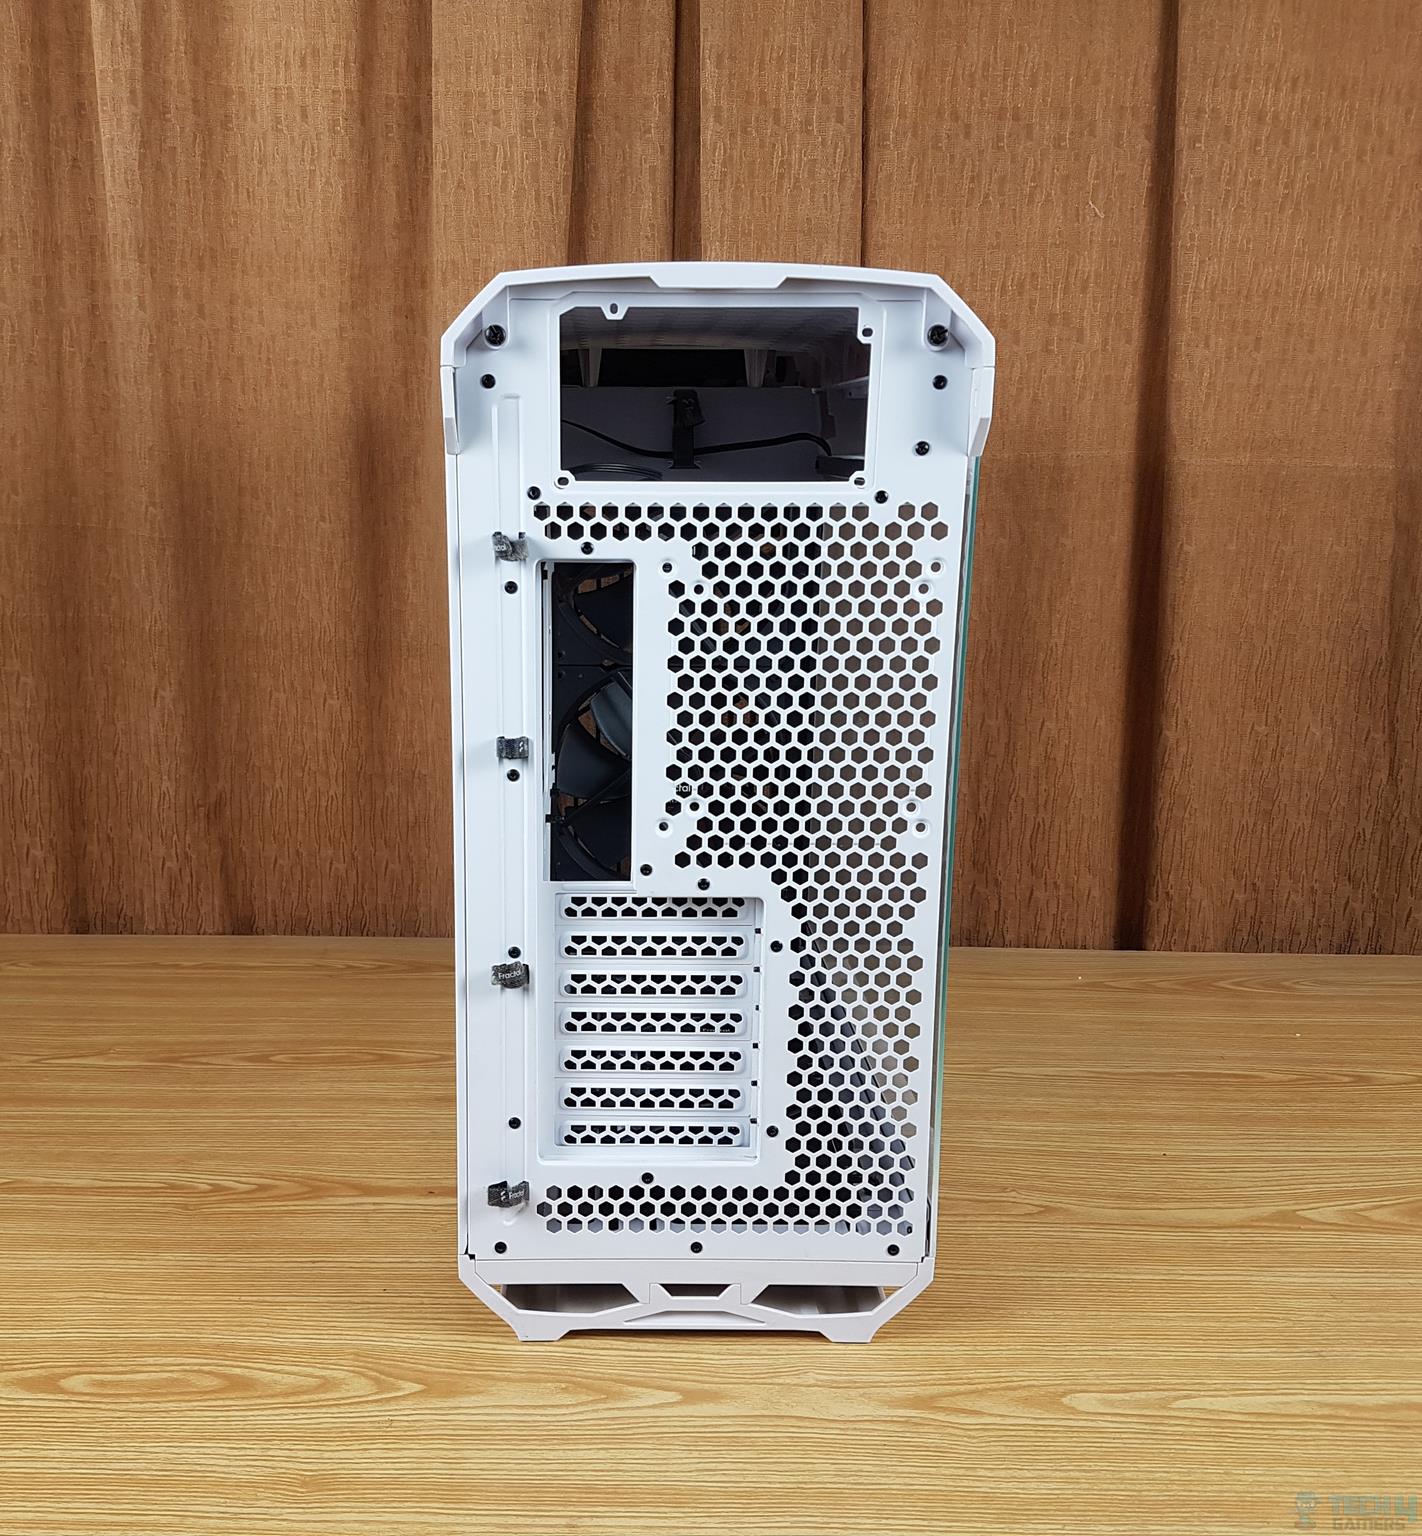 Fractal Design Torrent White TG Clear Tint PC Case — The rear view of this case